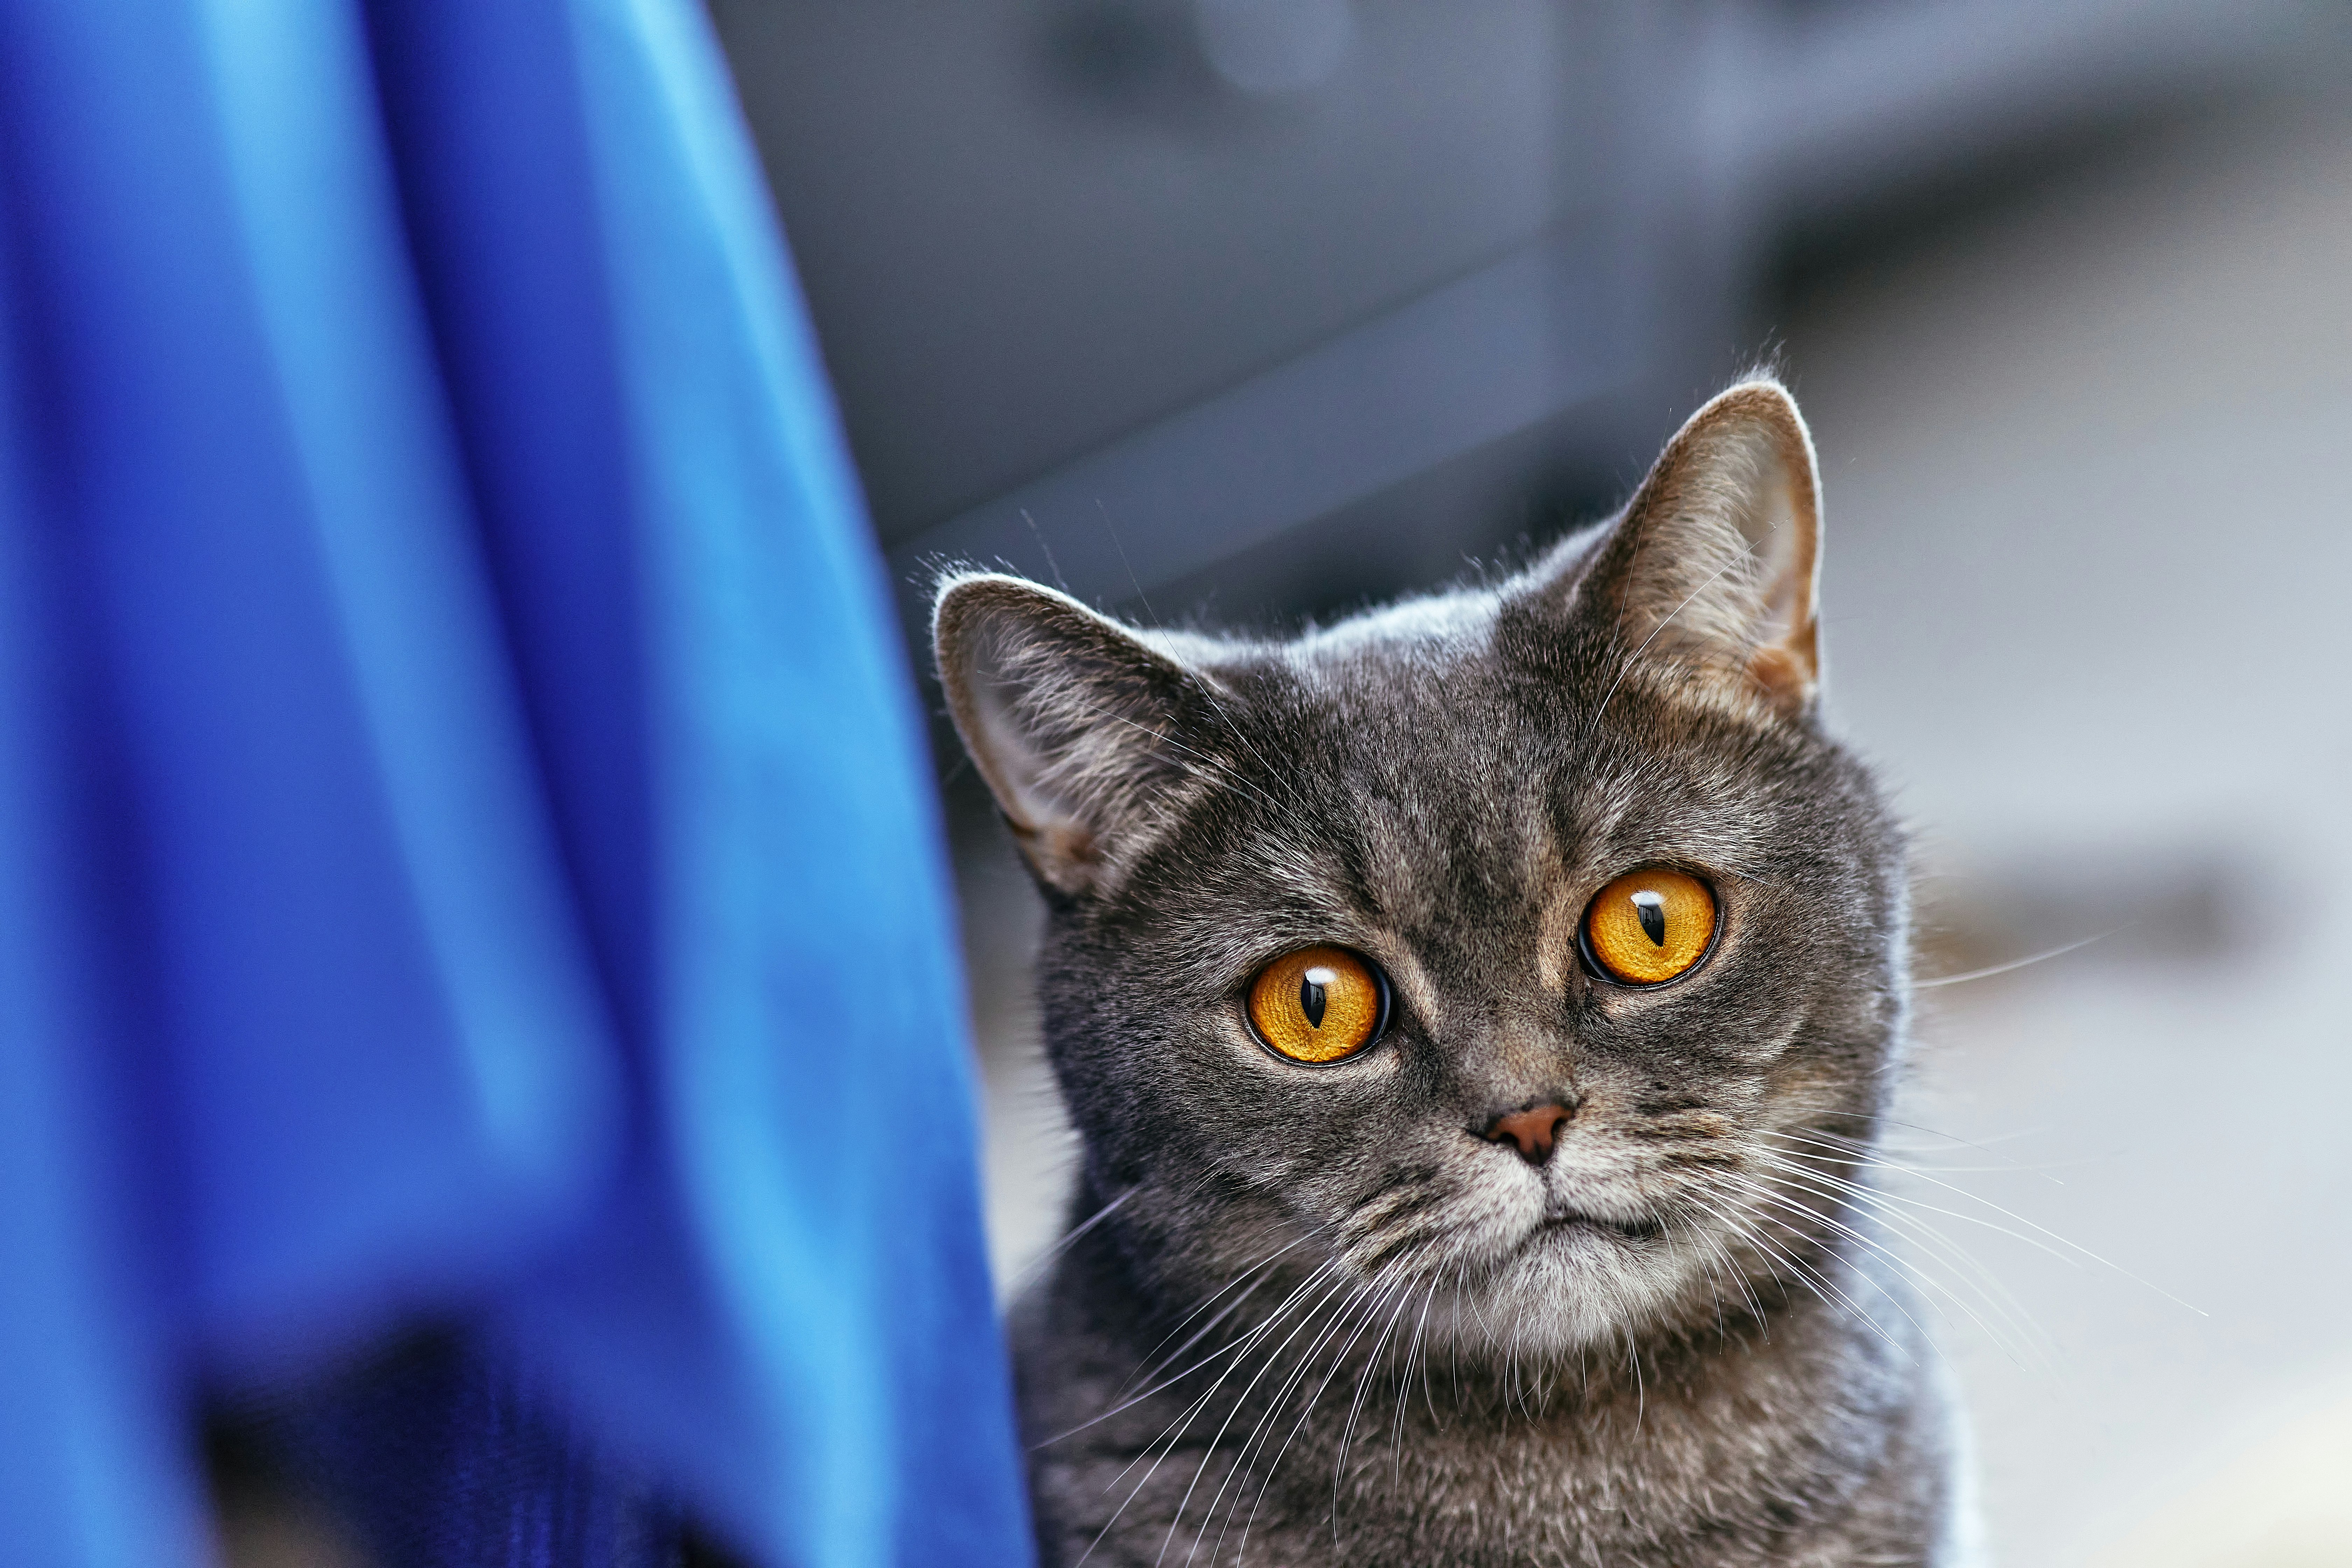 A fluffy purebred domestic British cat with bright orange eyes looks curiously at the camera. The muzzle of a fluffy cute house cat in close-up. Horizontal background with cat and blue curtain for publications and design